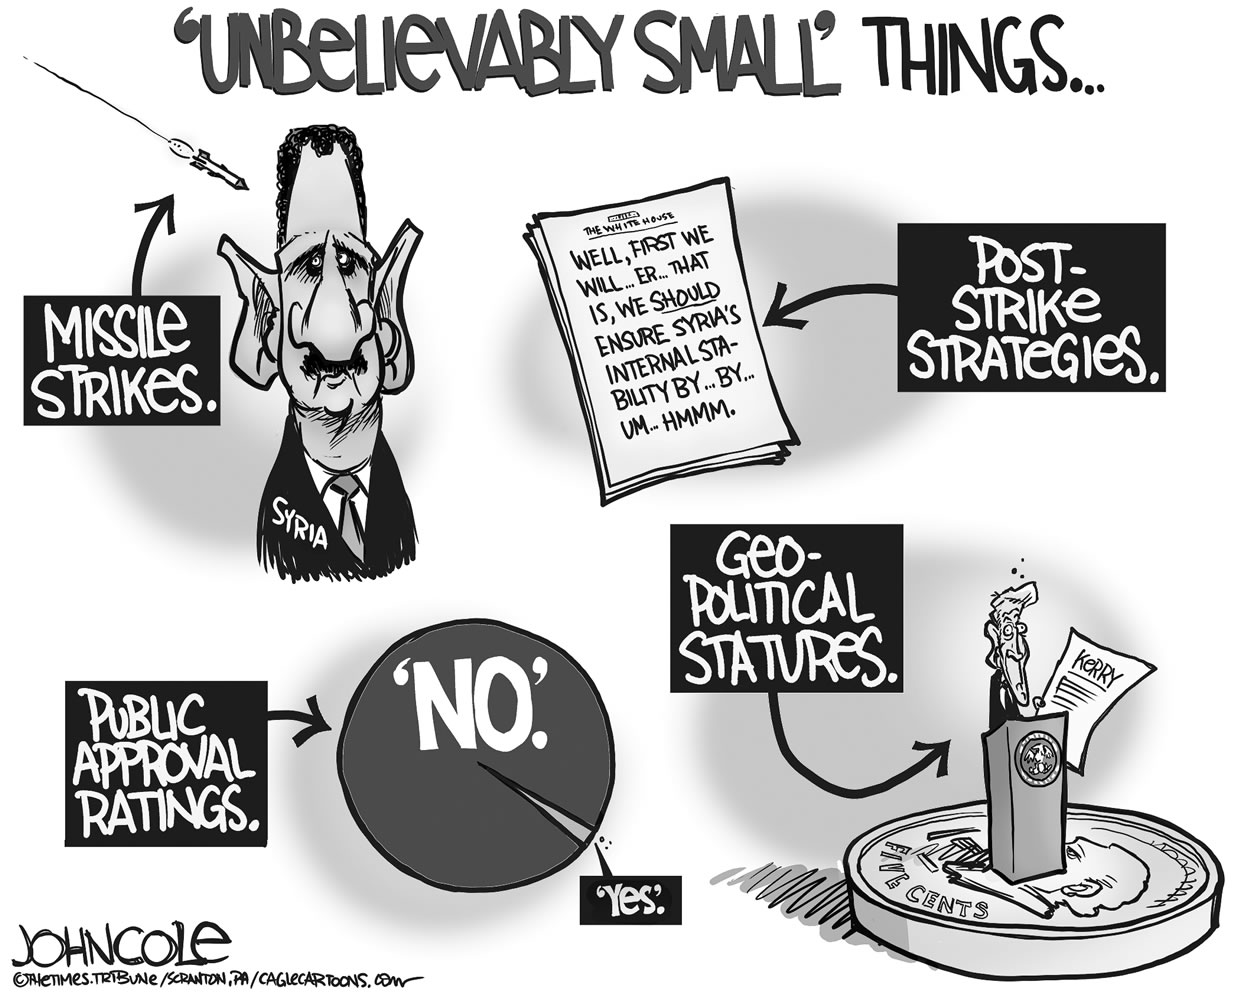 Things That Are Small Are